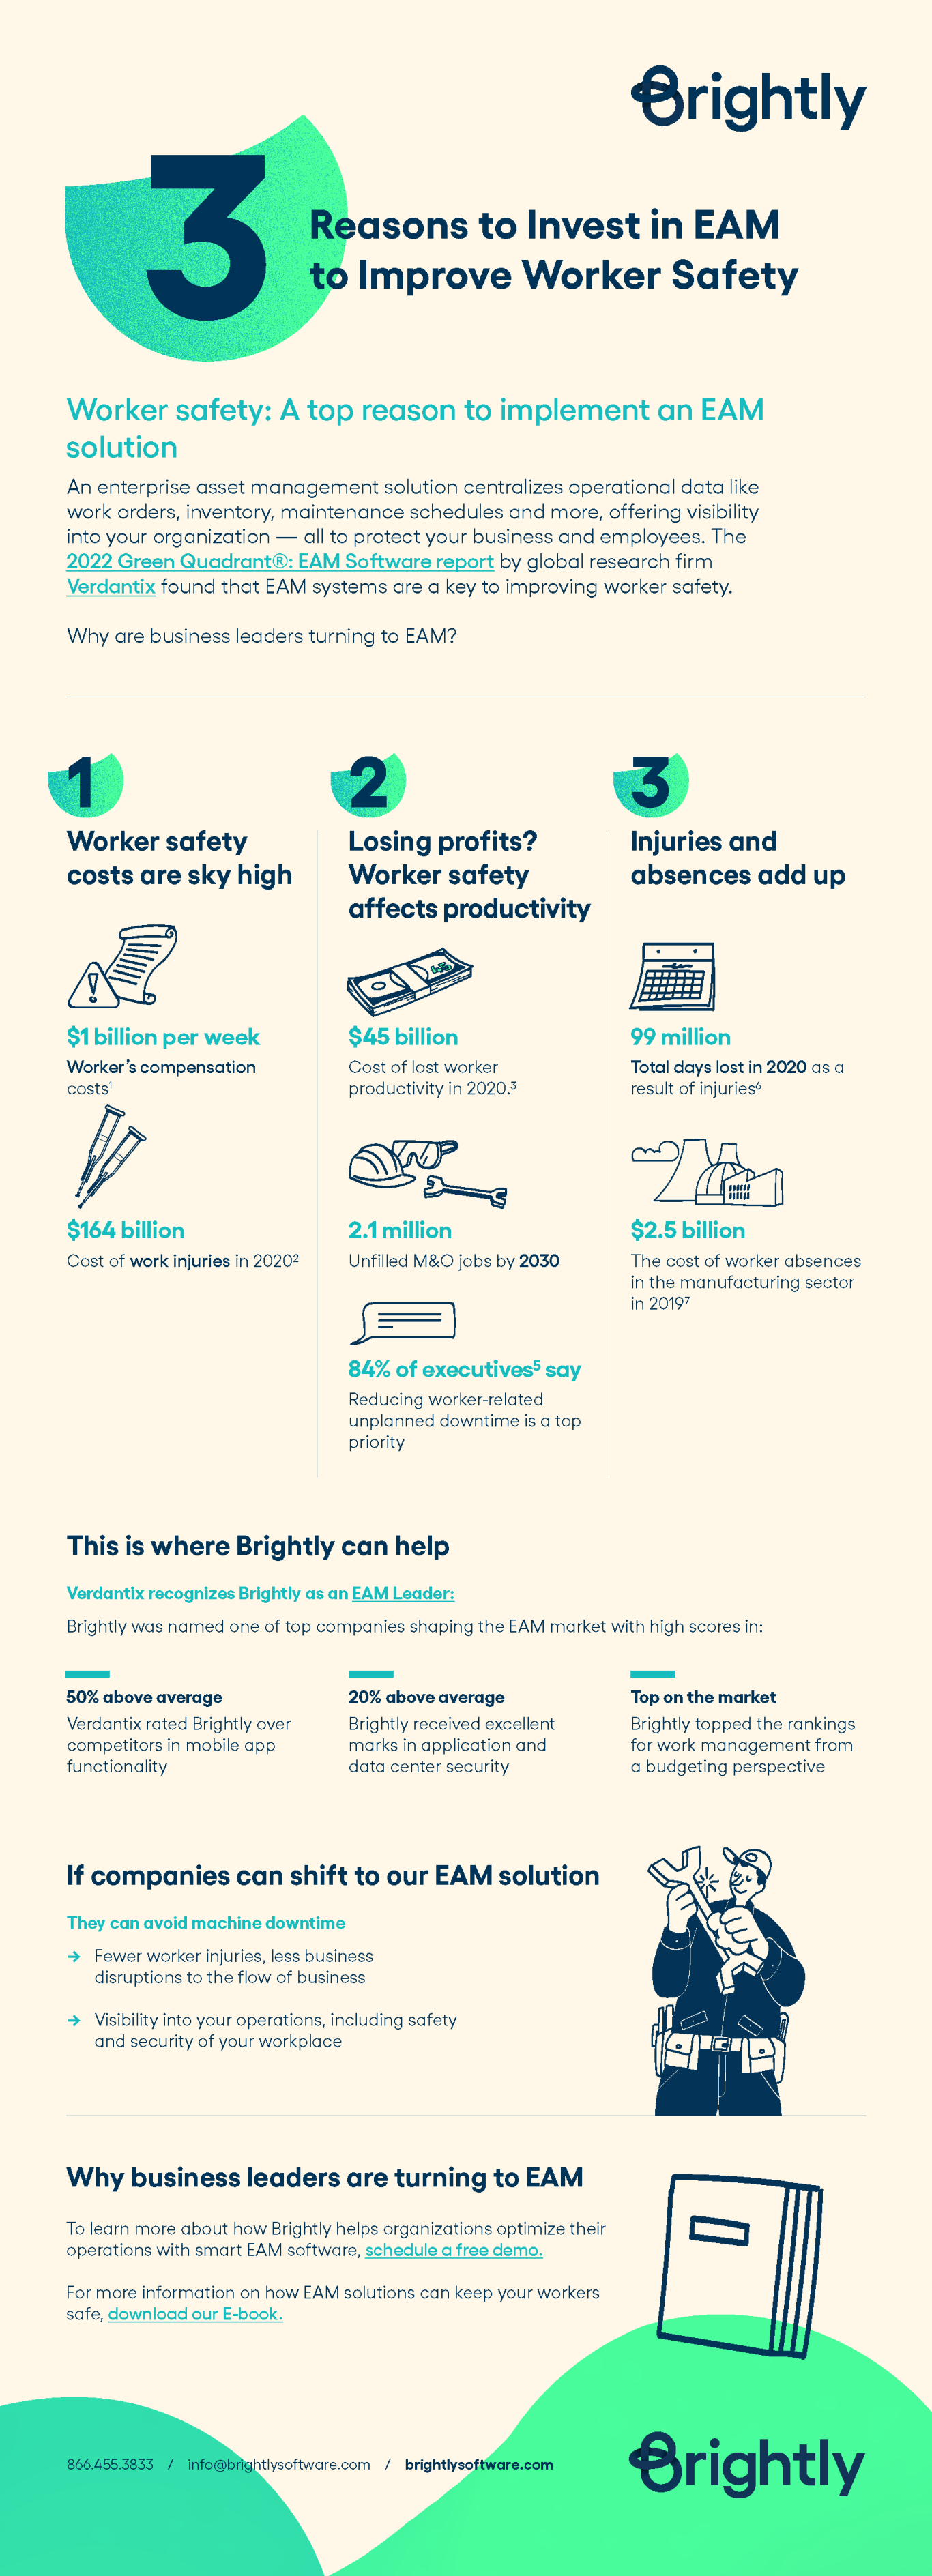 Brightly-Infographic-InvestEAMWorkerSafety-v2